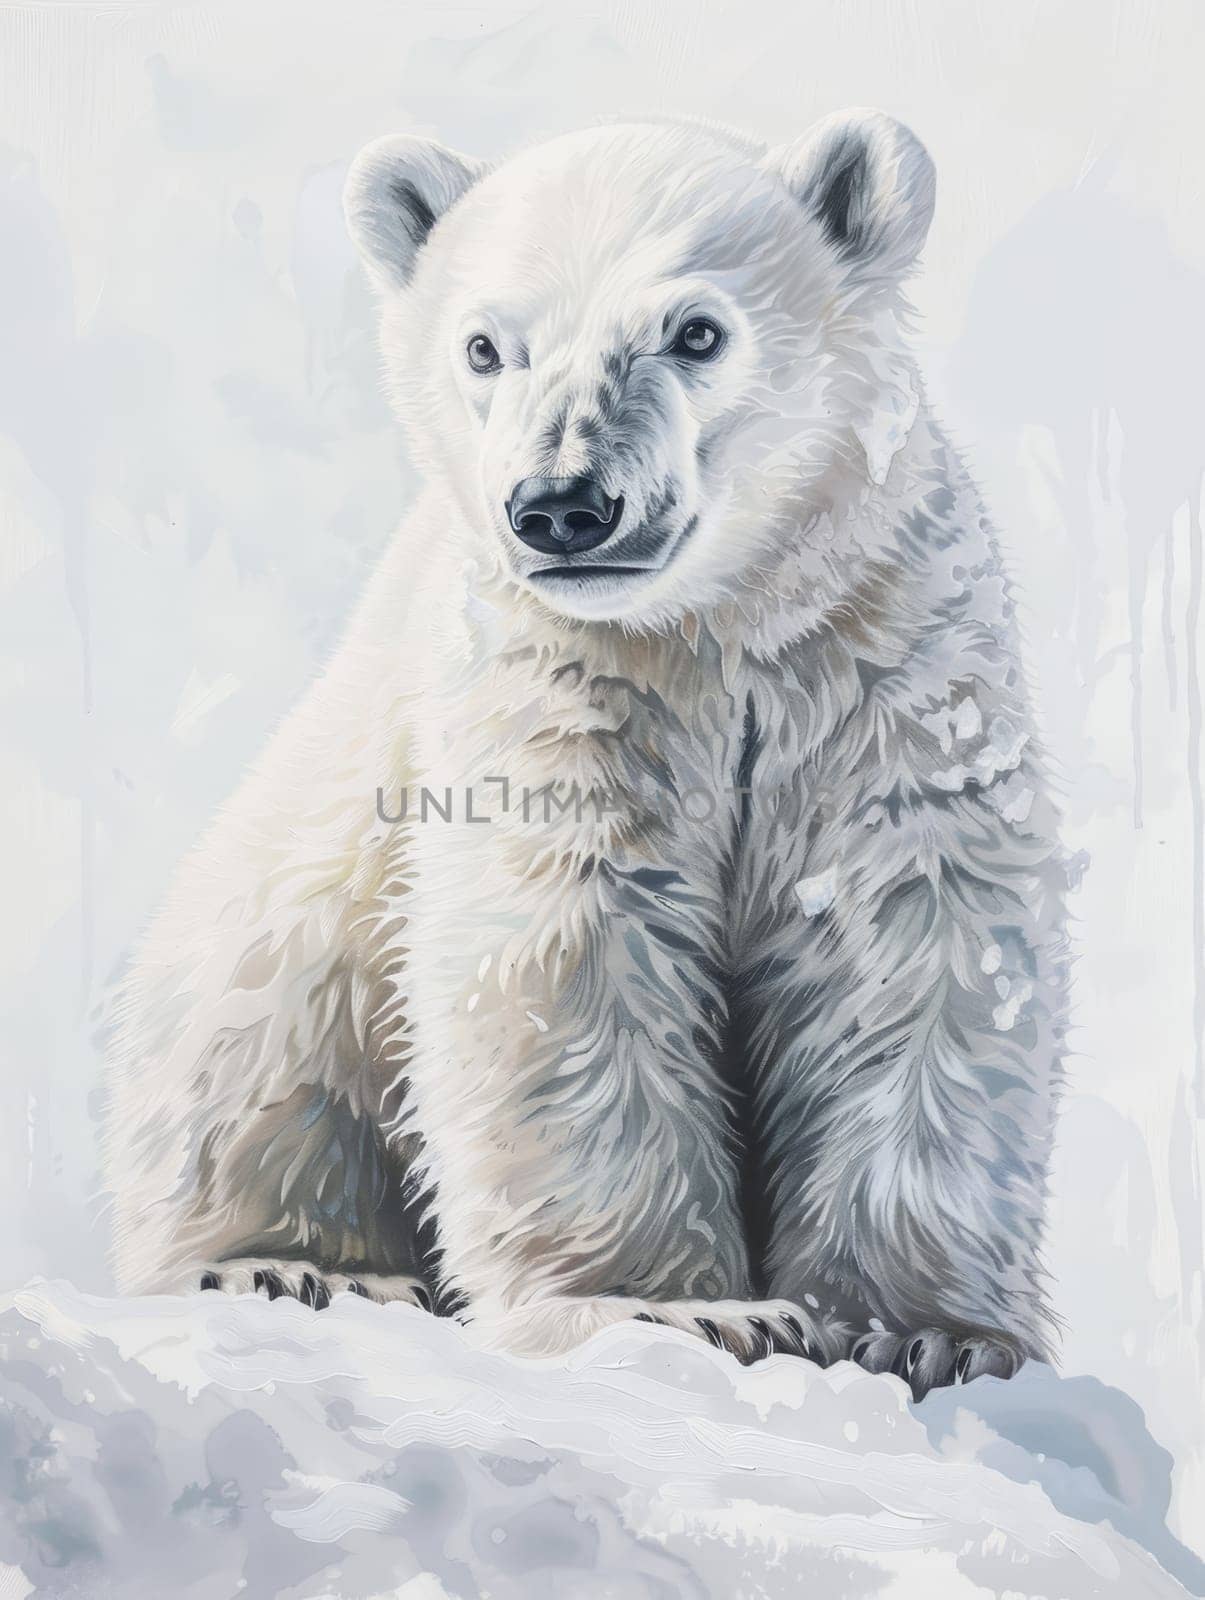 An artistic rendition of a polar bear, depicted with brush strokes that capture the animal's essence amidst a winter setting. by sfinks